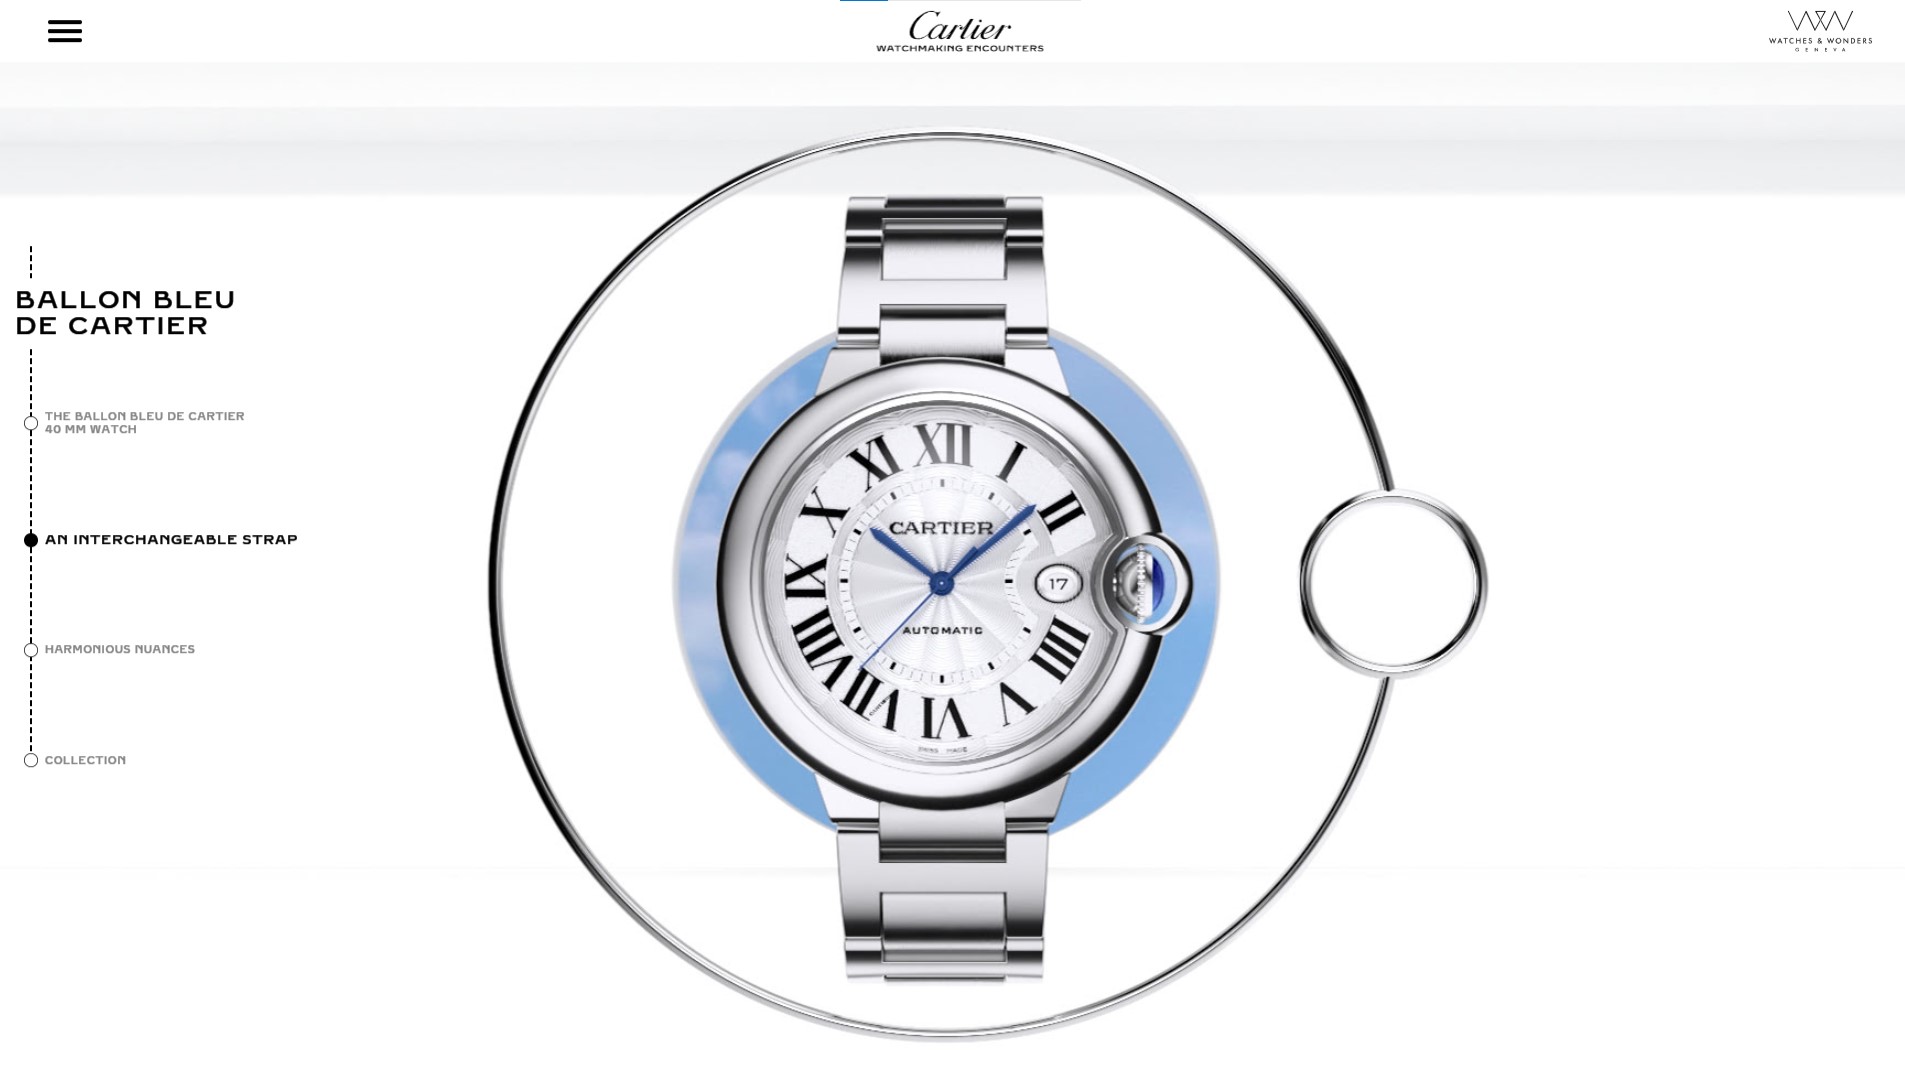 Cartier watchmaking encounters products animation